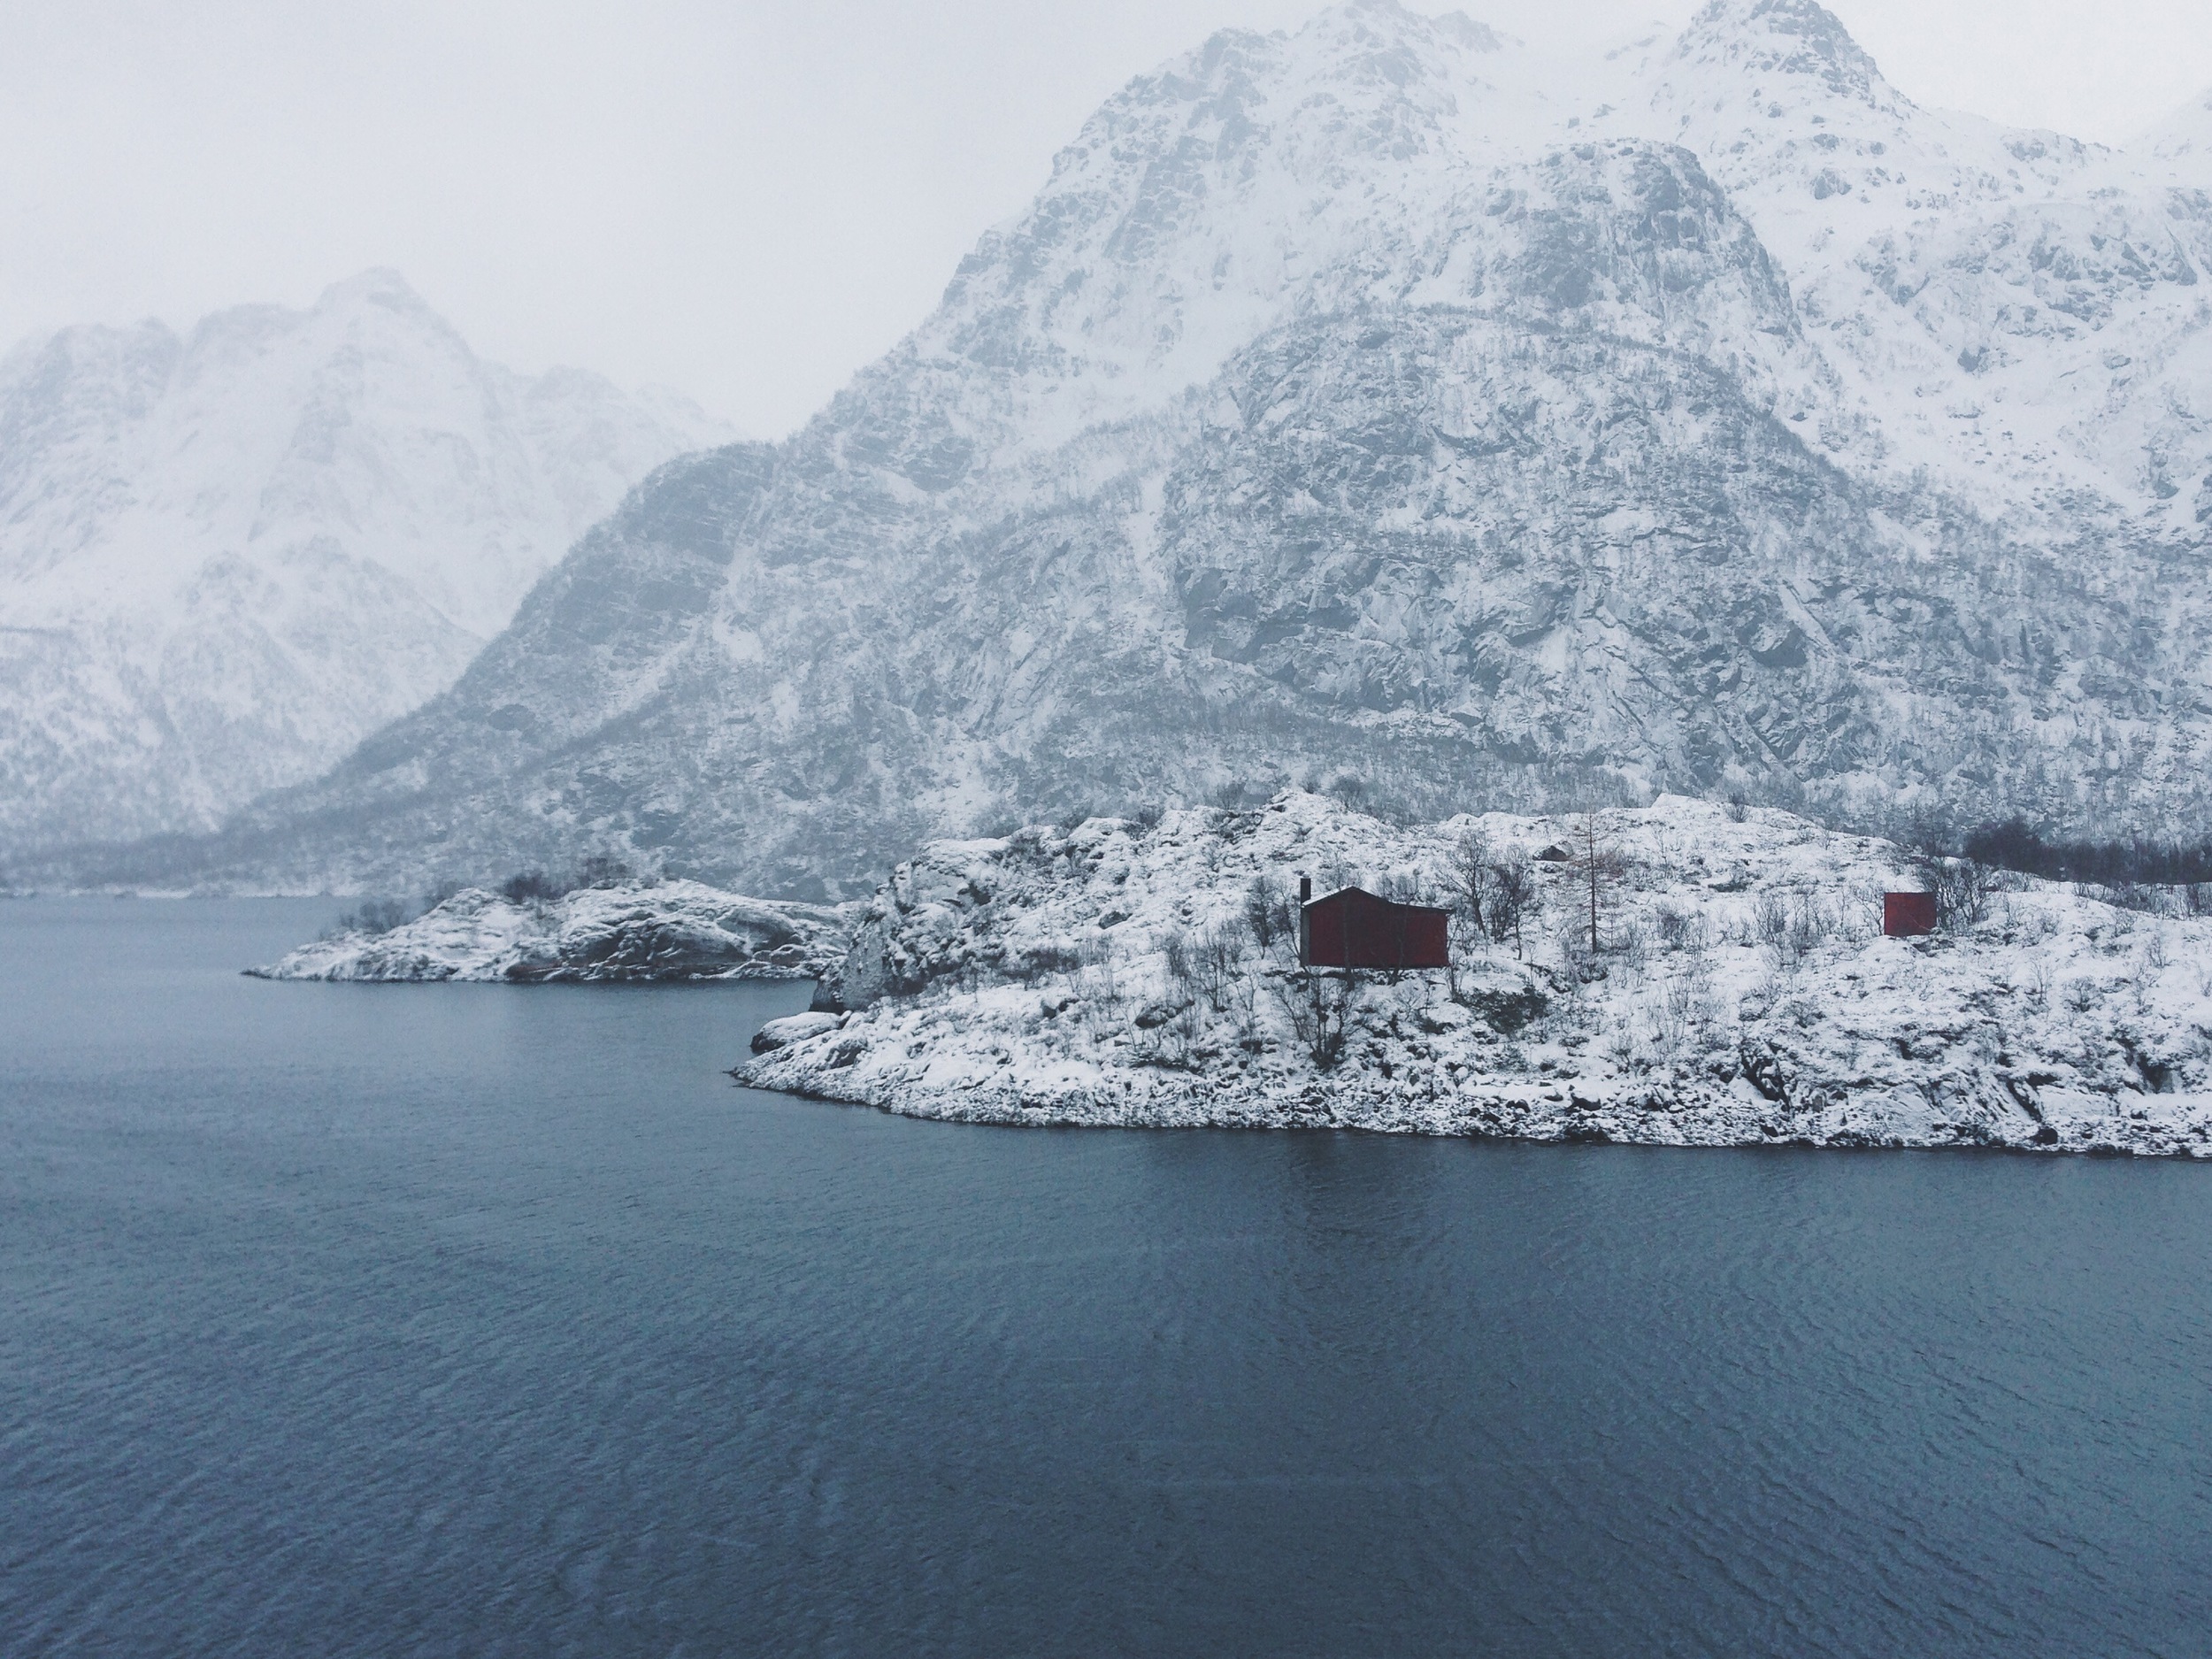   "Every Giant Will Fall // Every Mountain Will Move"   Trollfjord, Norway ||&nbsp;March 2014 || Nikon D3000 